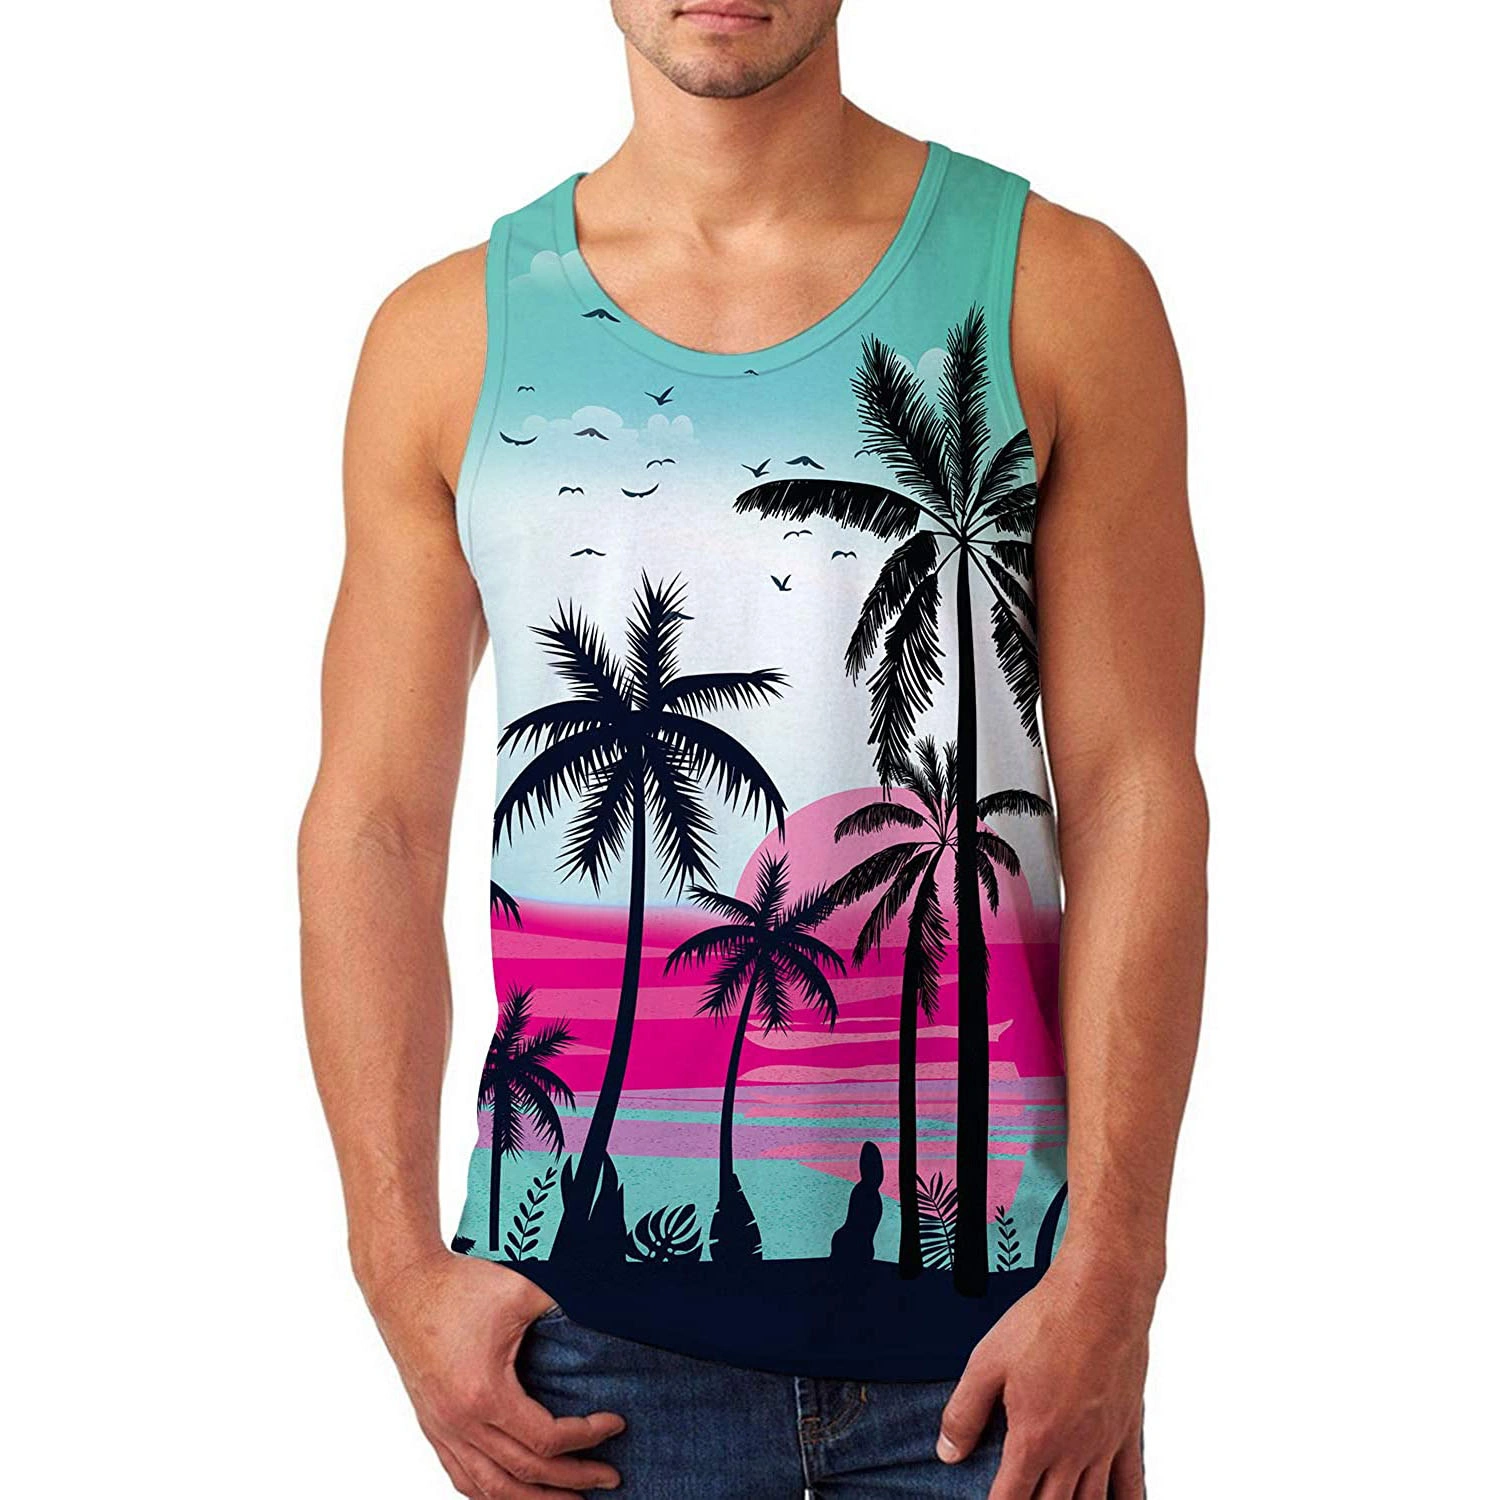 Wholesale Tank Tops Suppliers In Malaysia